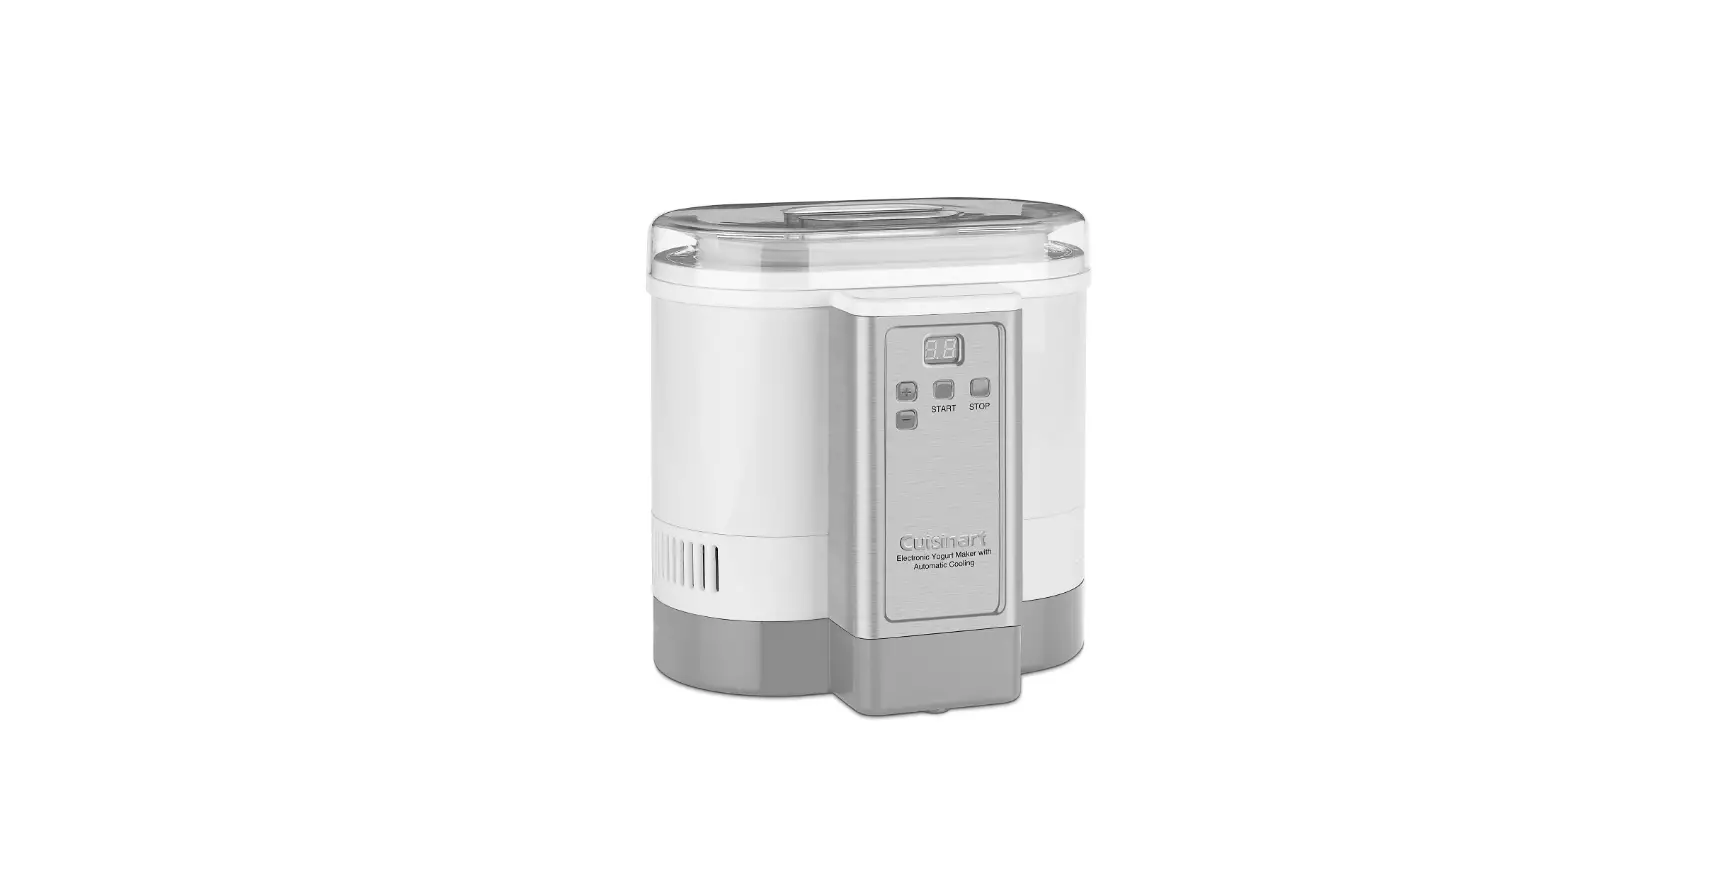 Cuisinart Electronic Yogurt Maker with Automatic Cooling